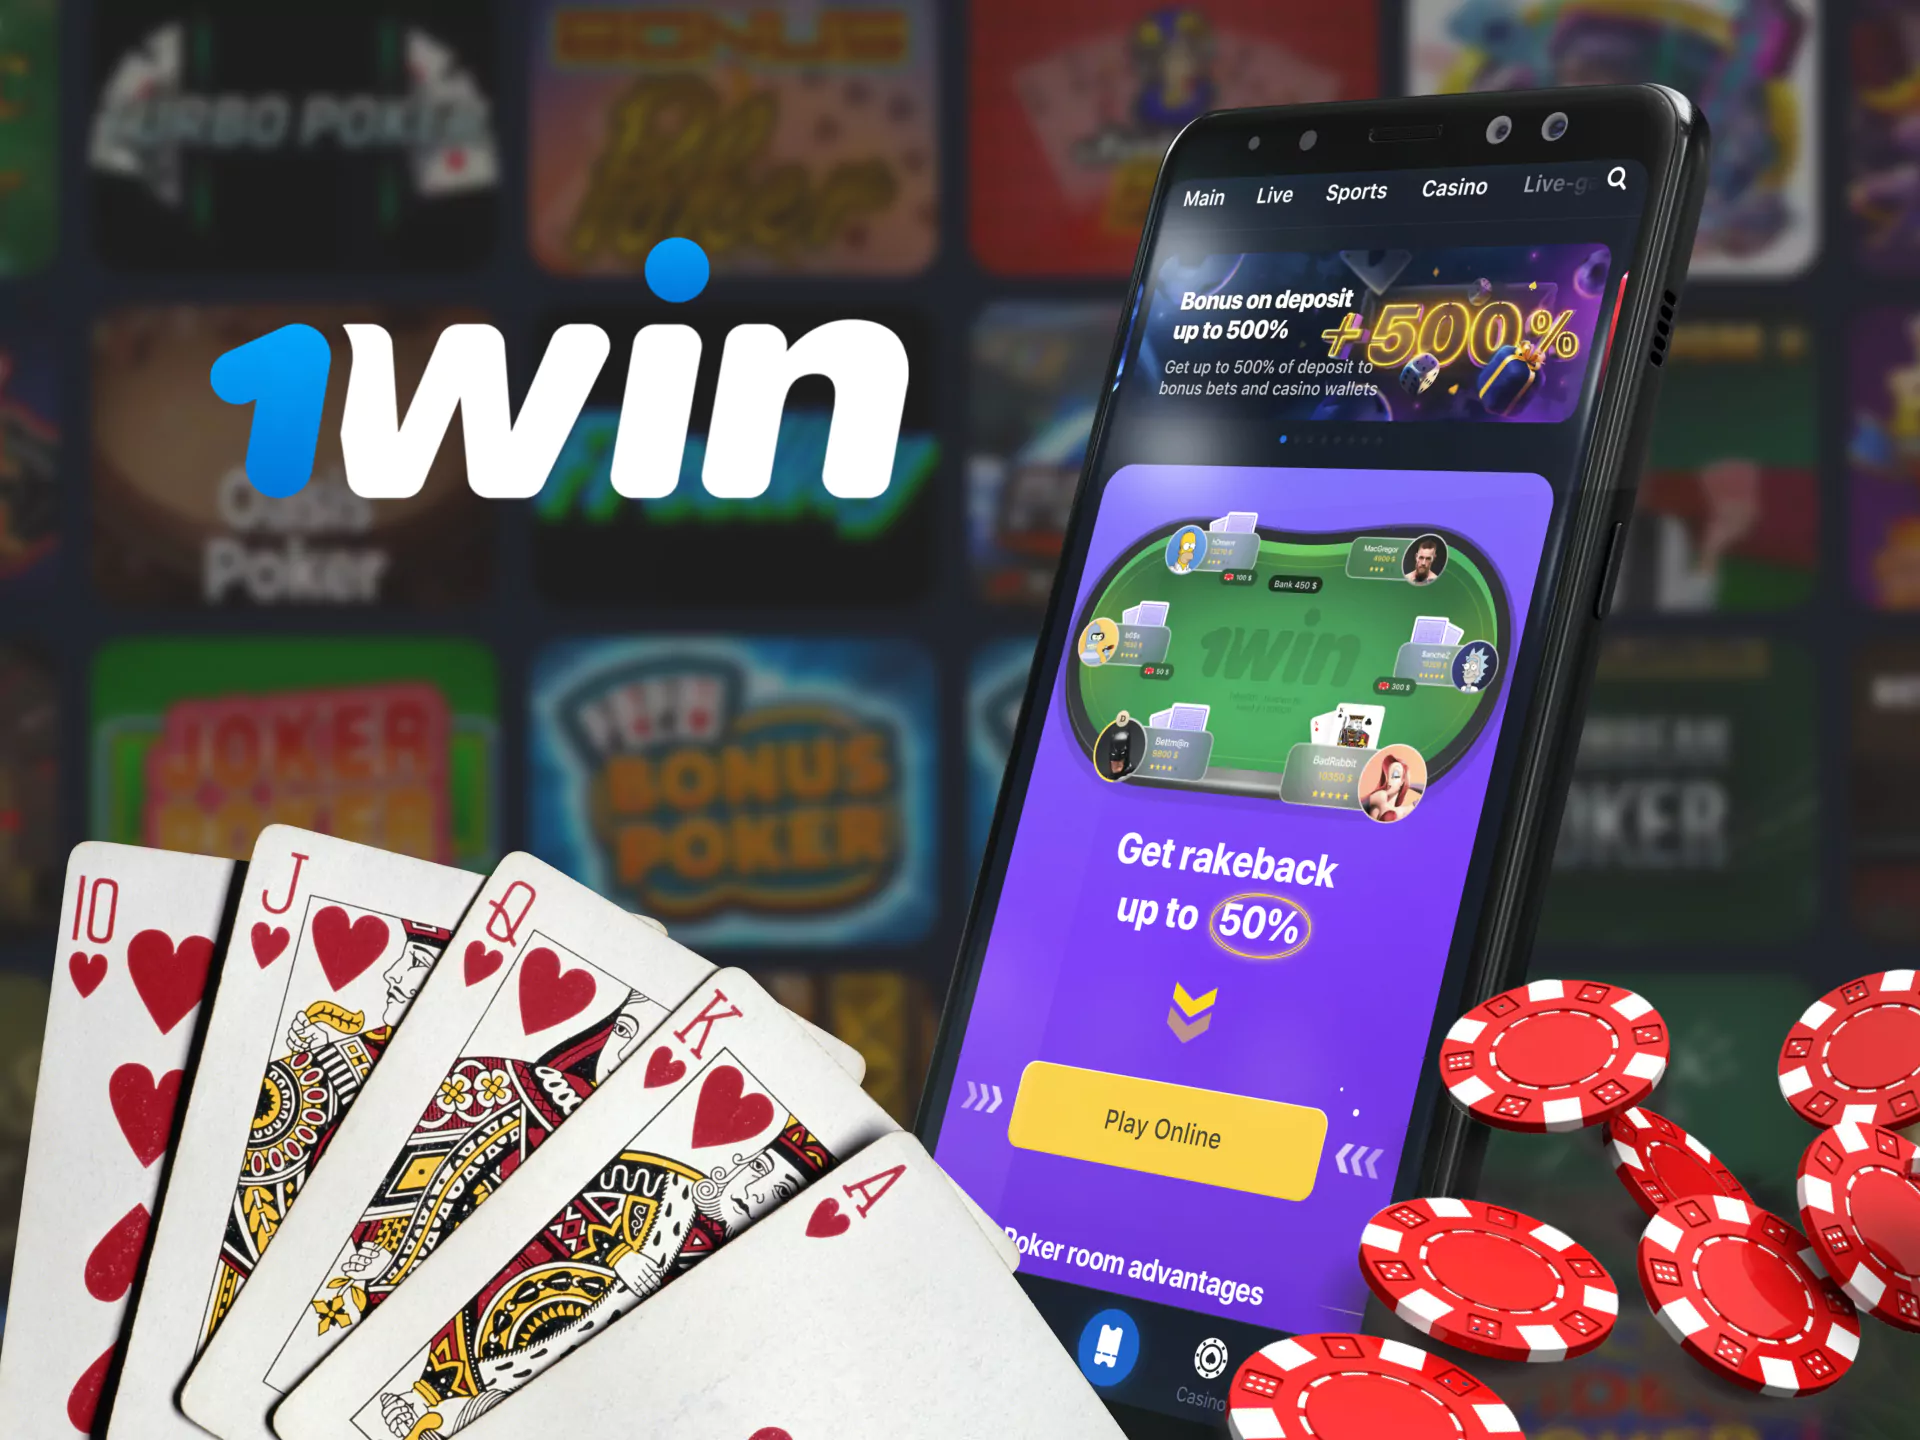 In the 1Win app, play poker and win.